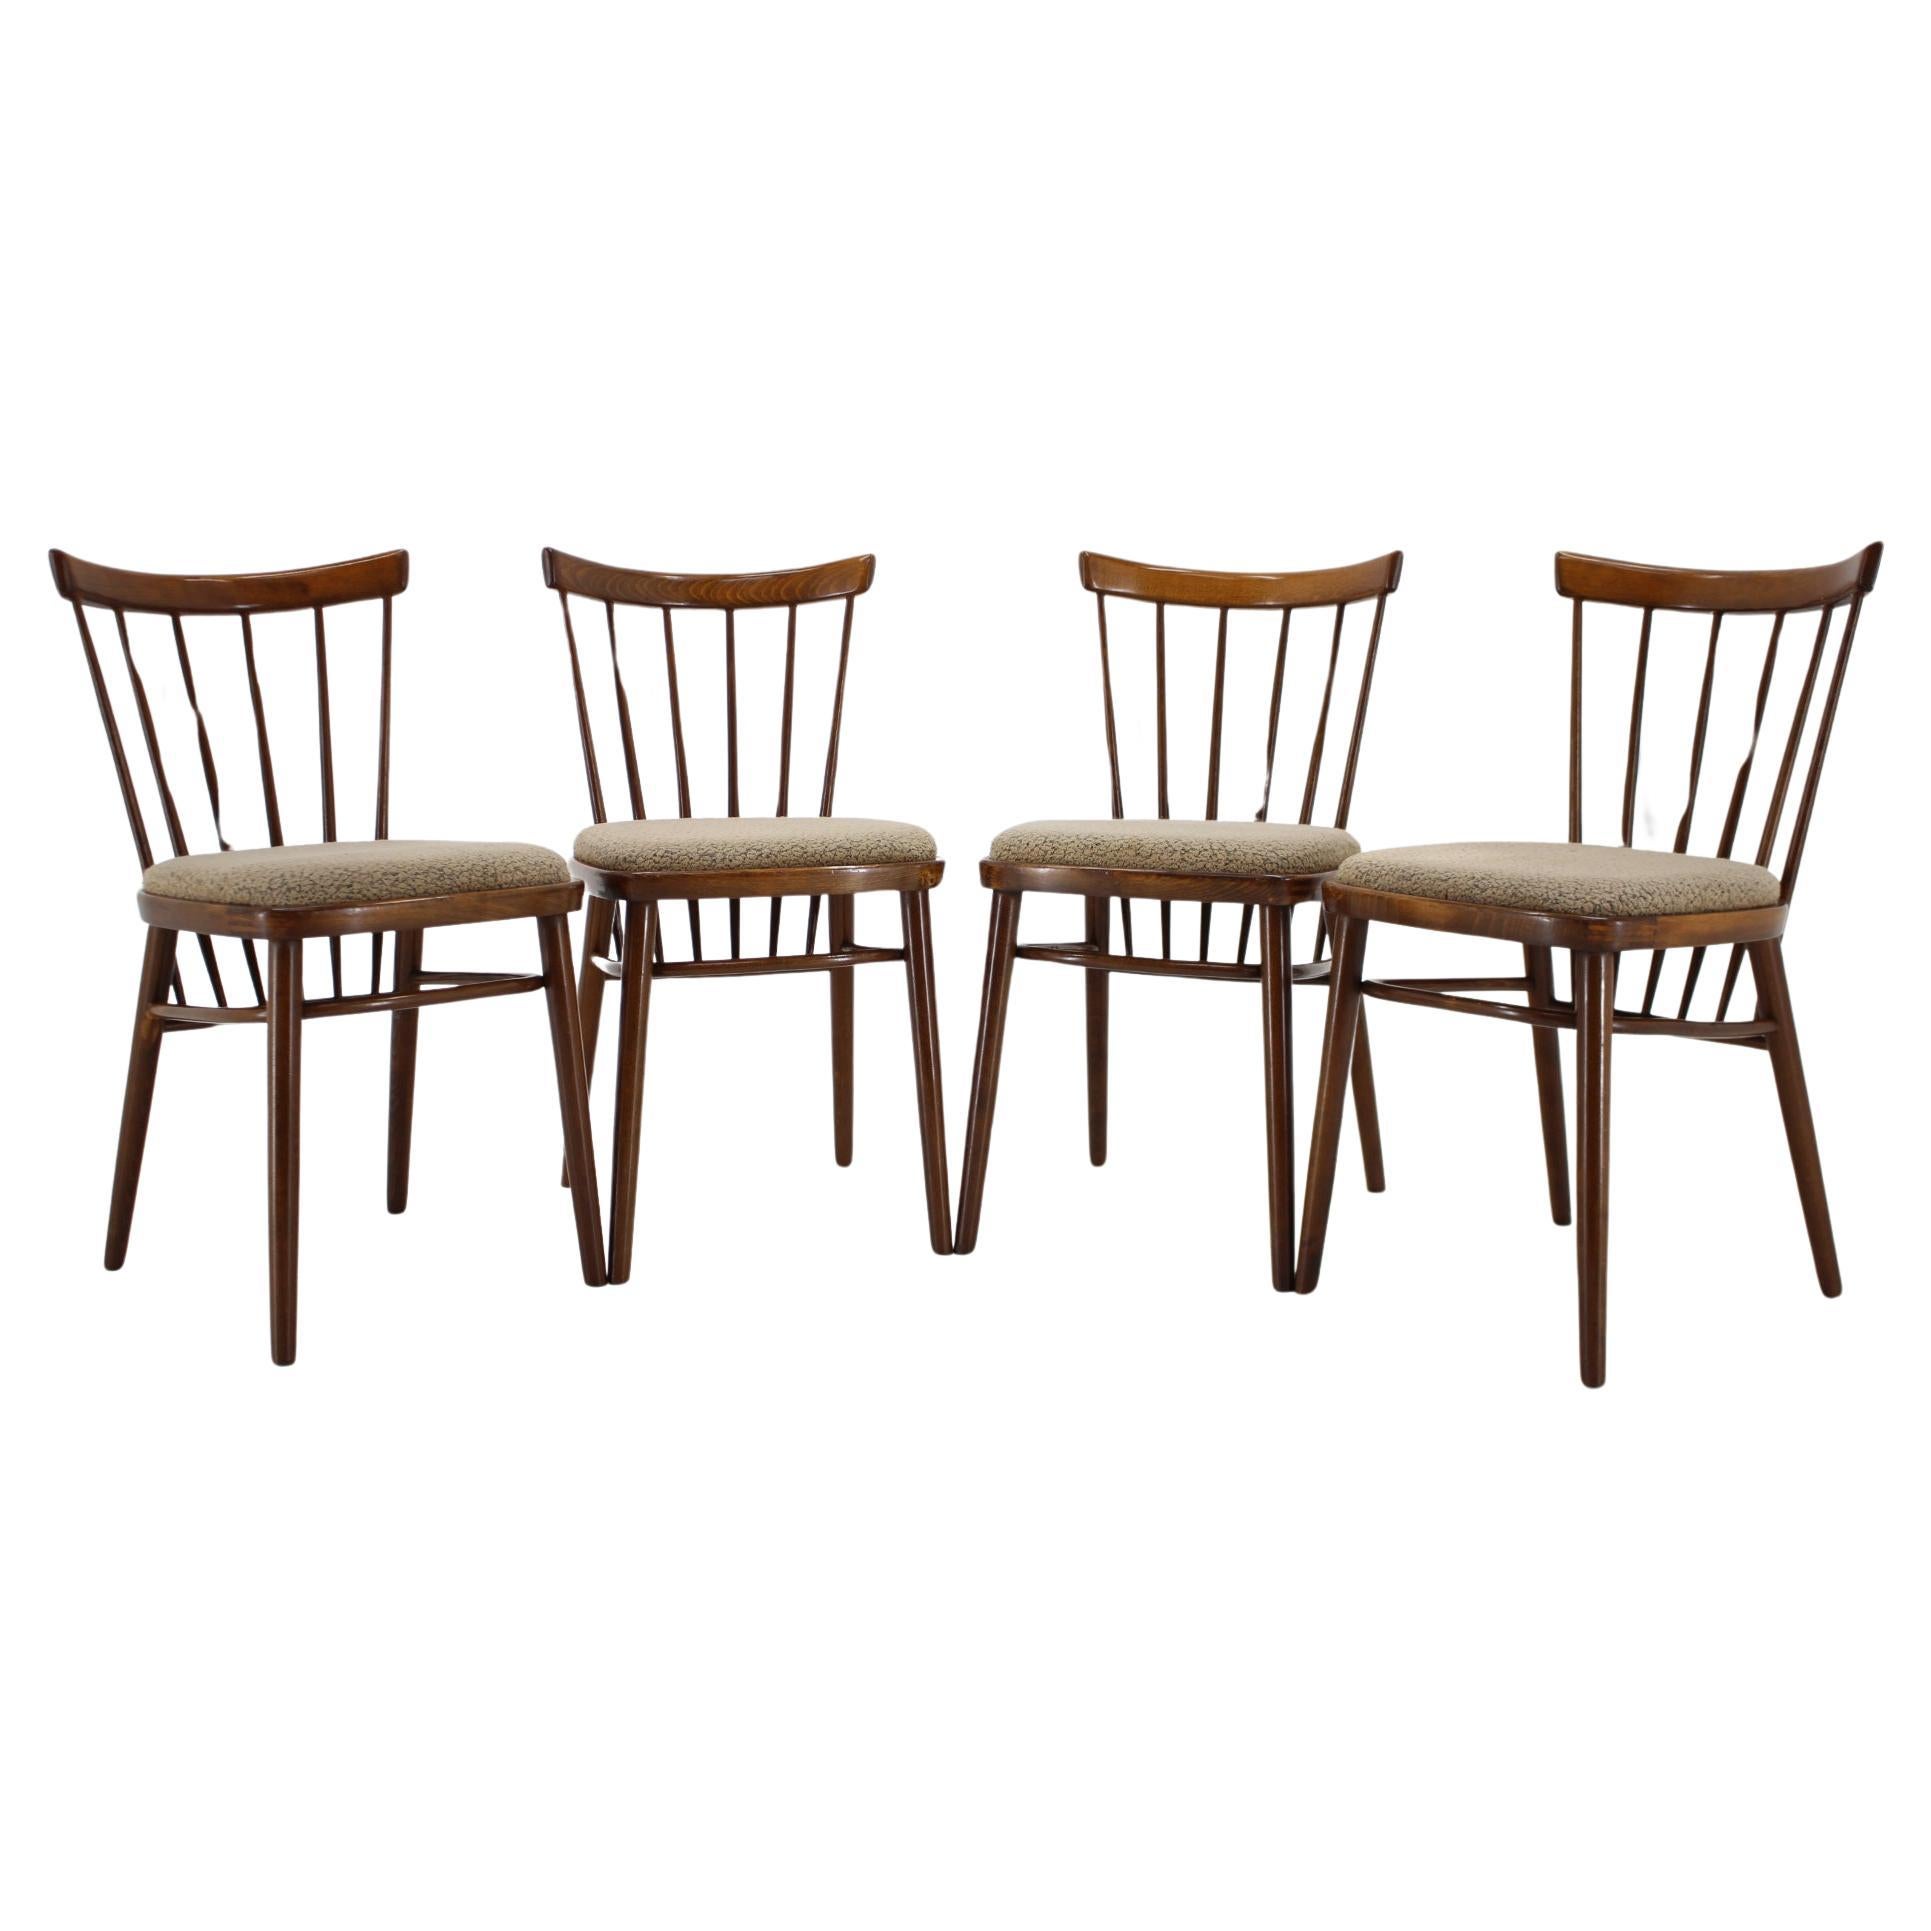 1960s Set of 4 Dining Chairs by Tatra, Czechoslovakia For Sale